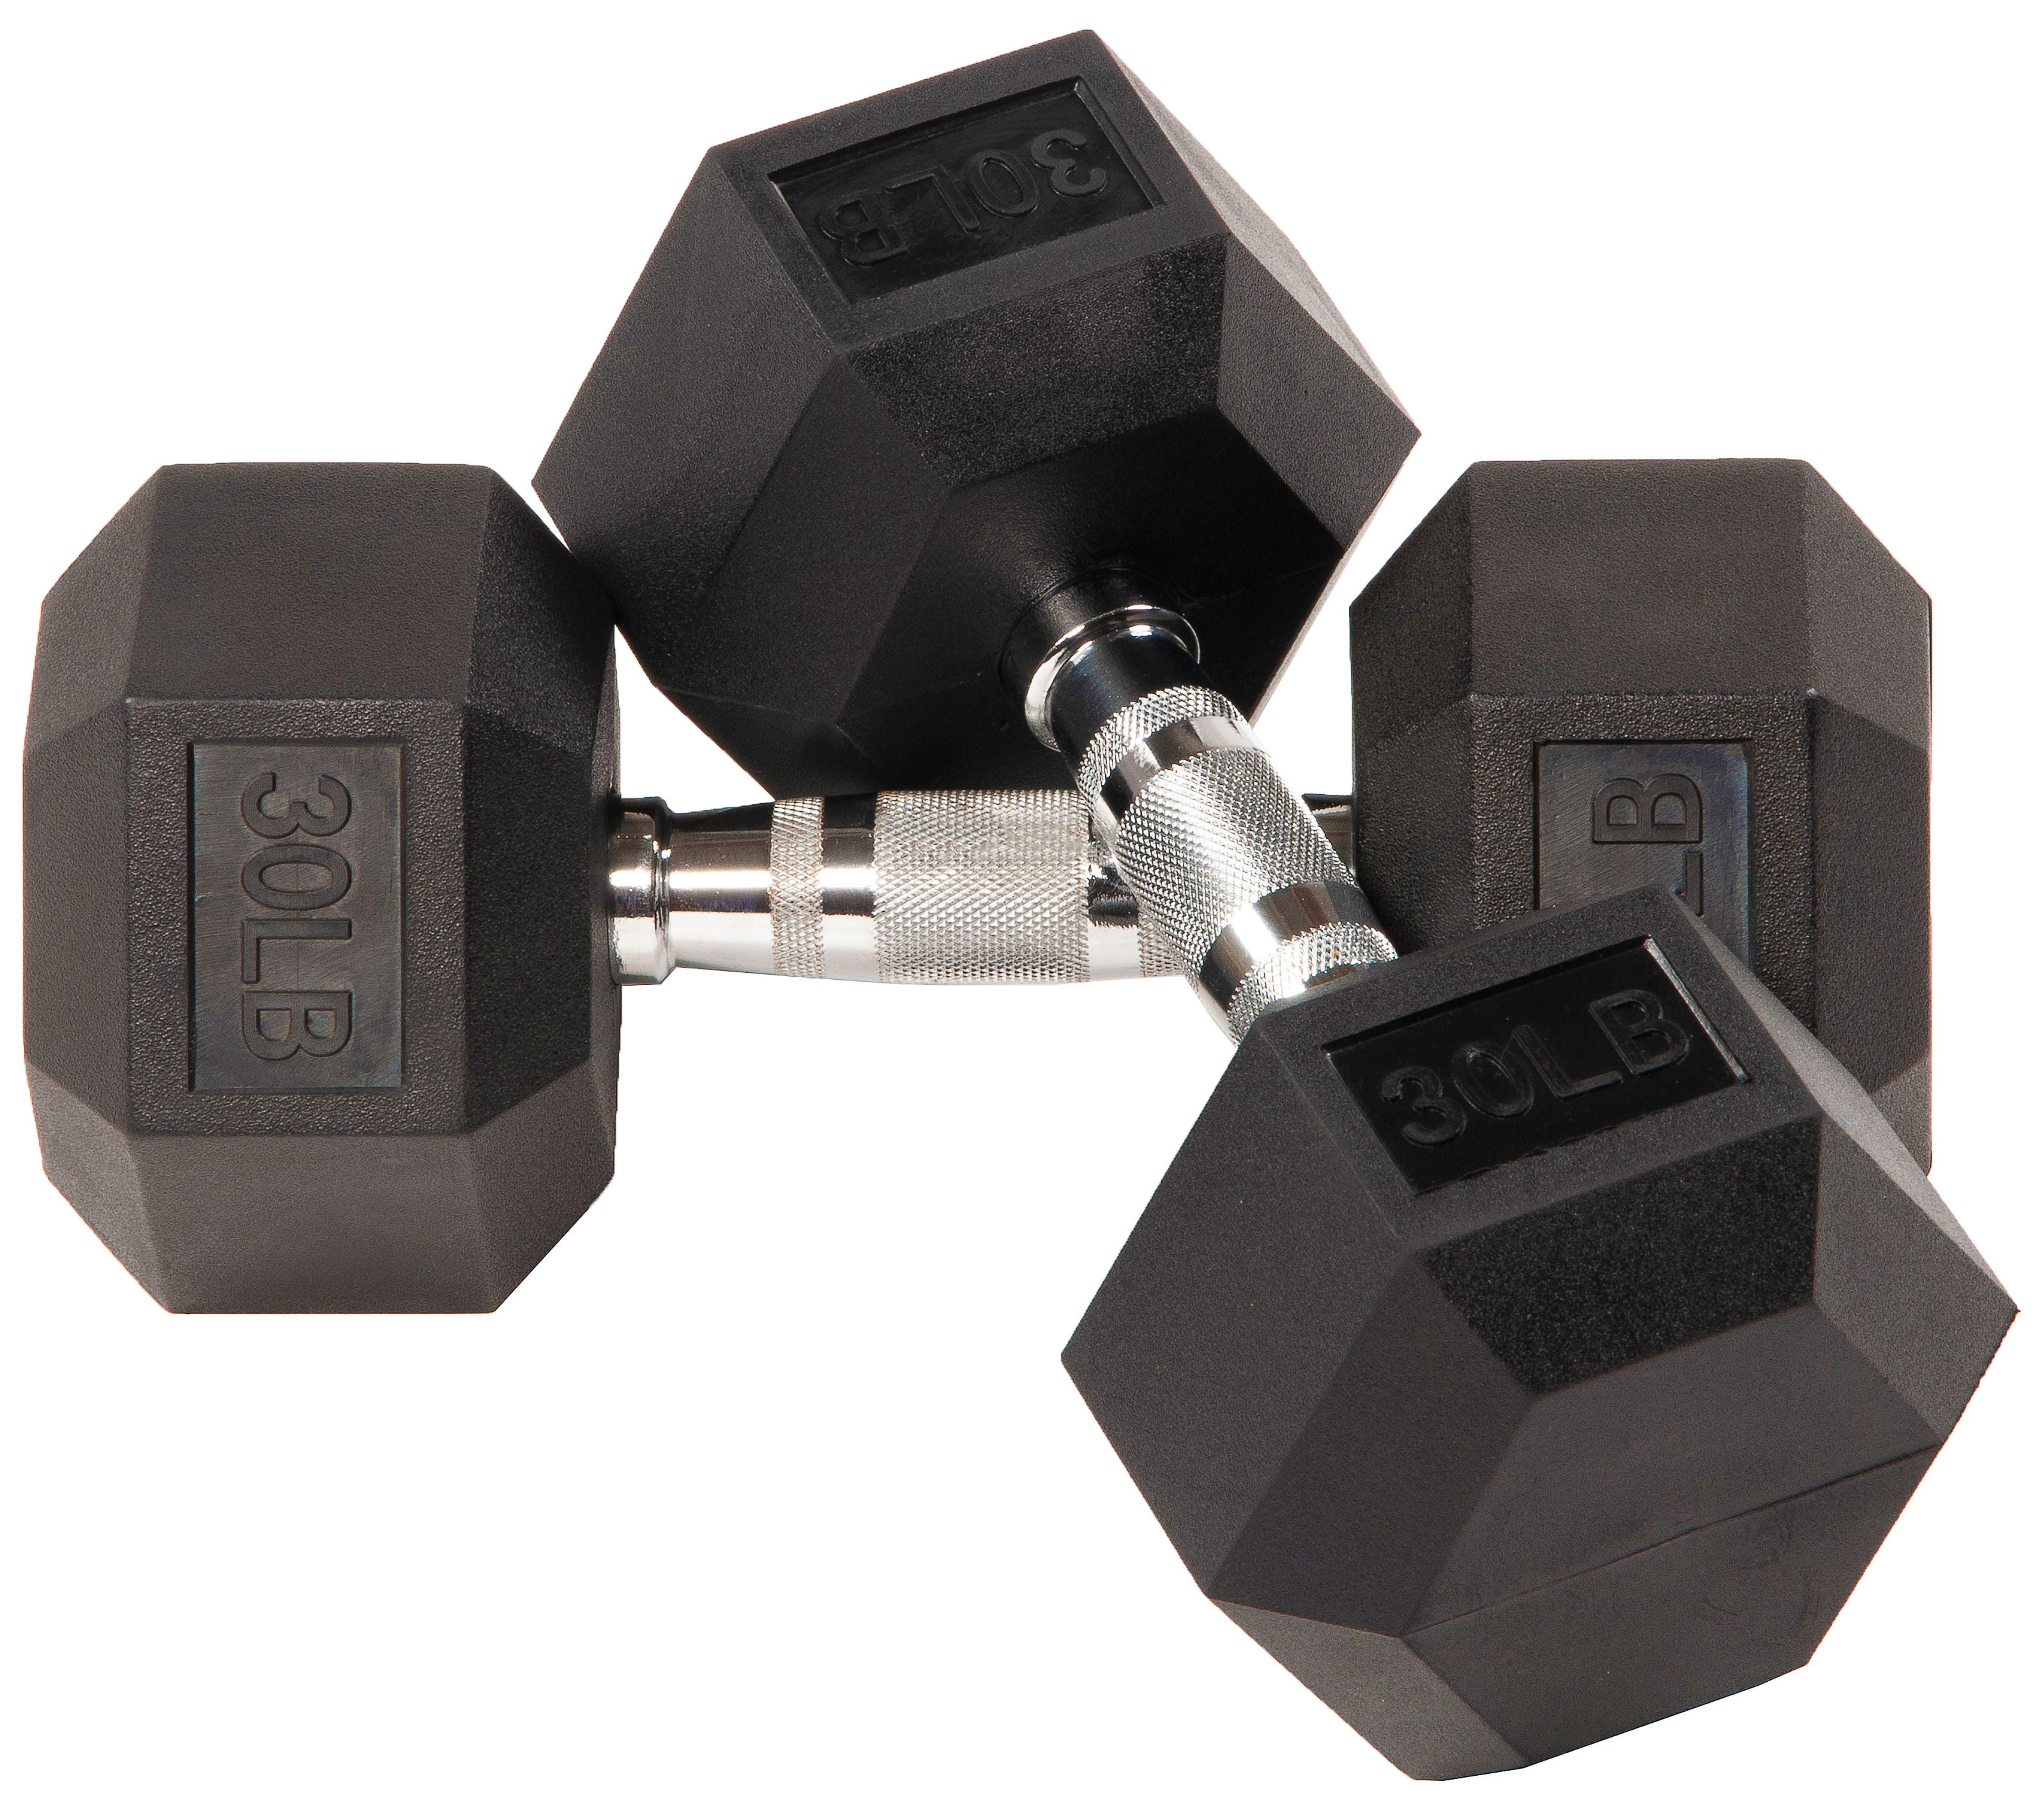 30 45 LB Home Gym Fit 25 20 Details about   New Rubber Coated Hex Dumbbells Weight Set 15 